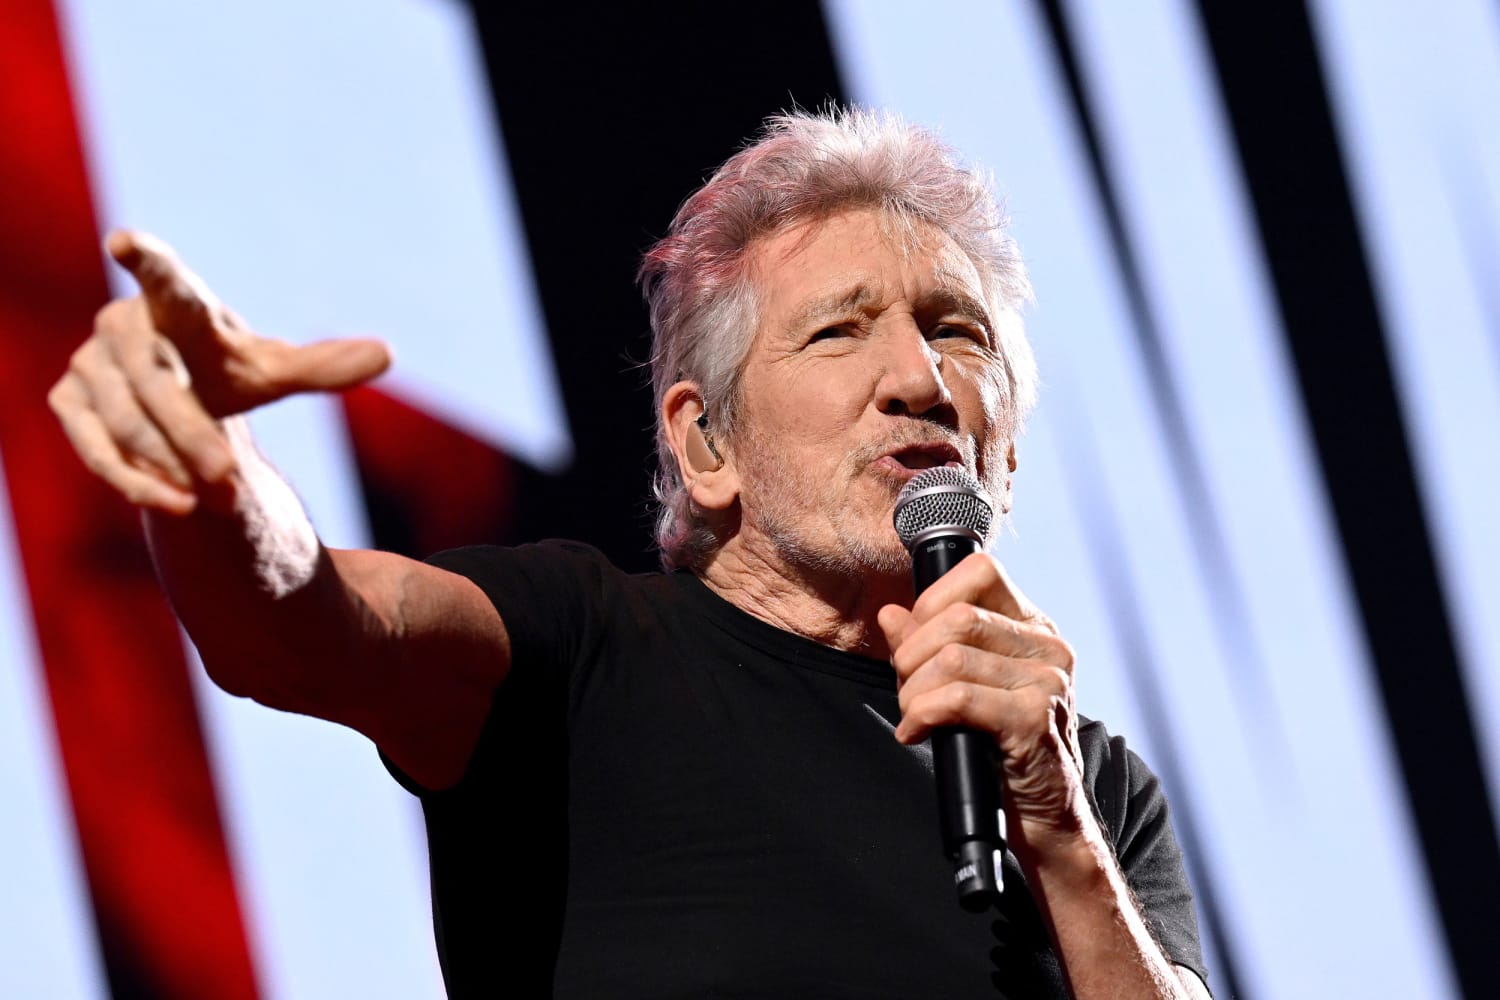 Berlin police investigate Pink Floyd rocker Roger Waters over Nazi-style costume worn during concert